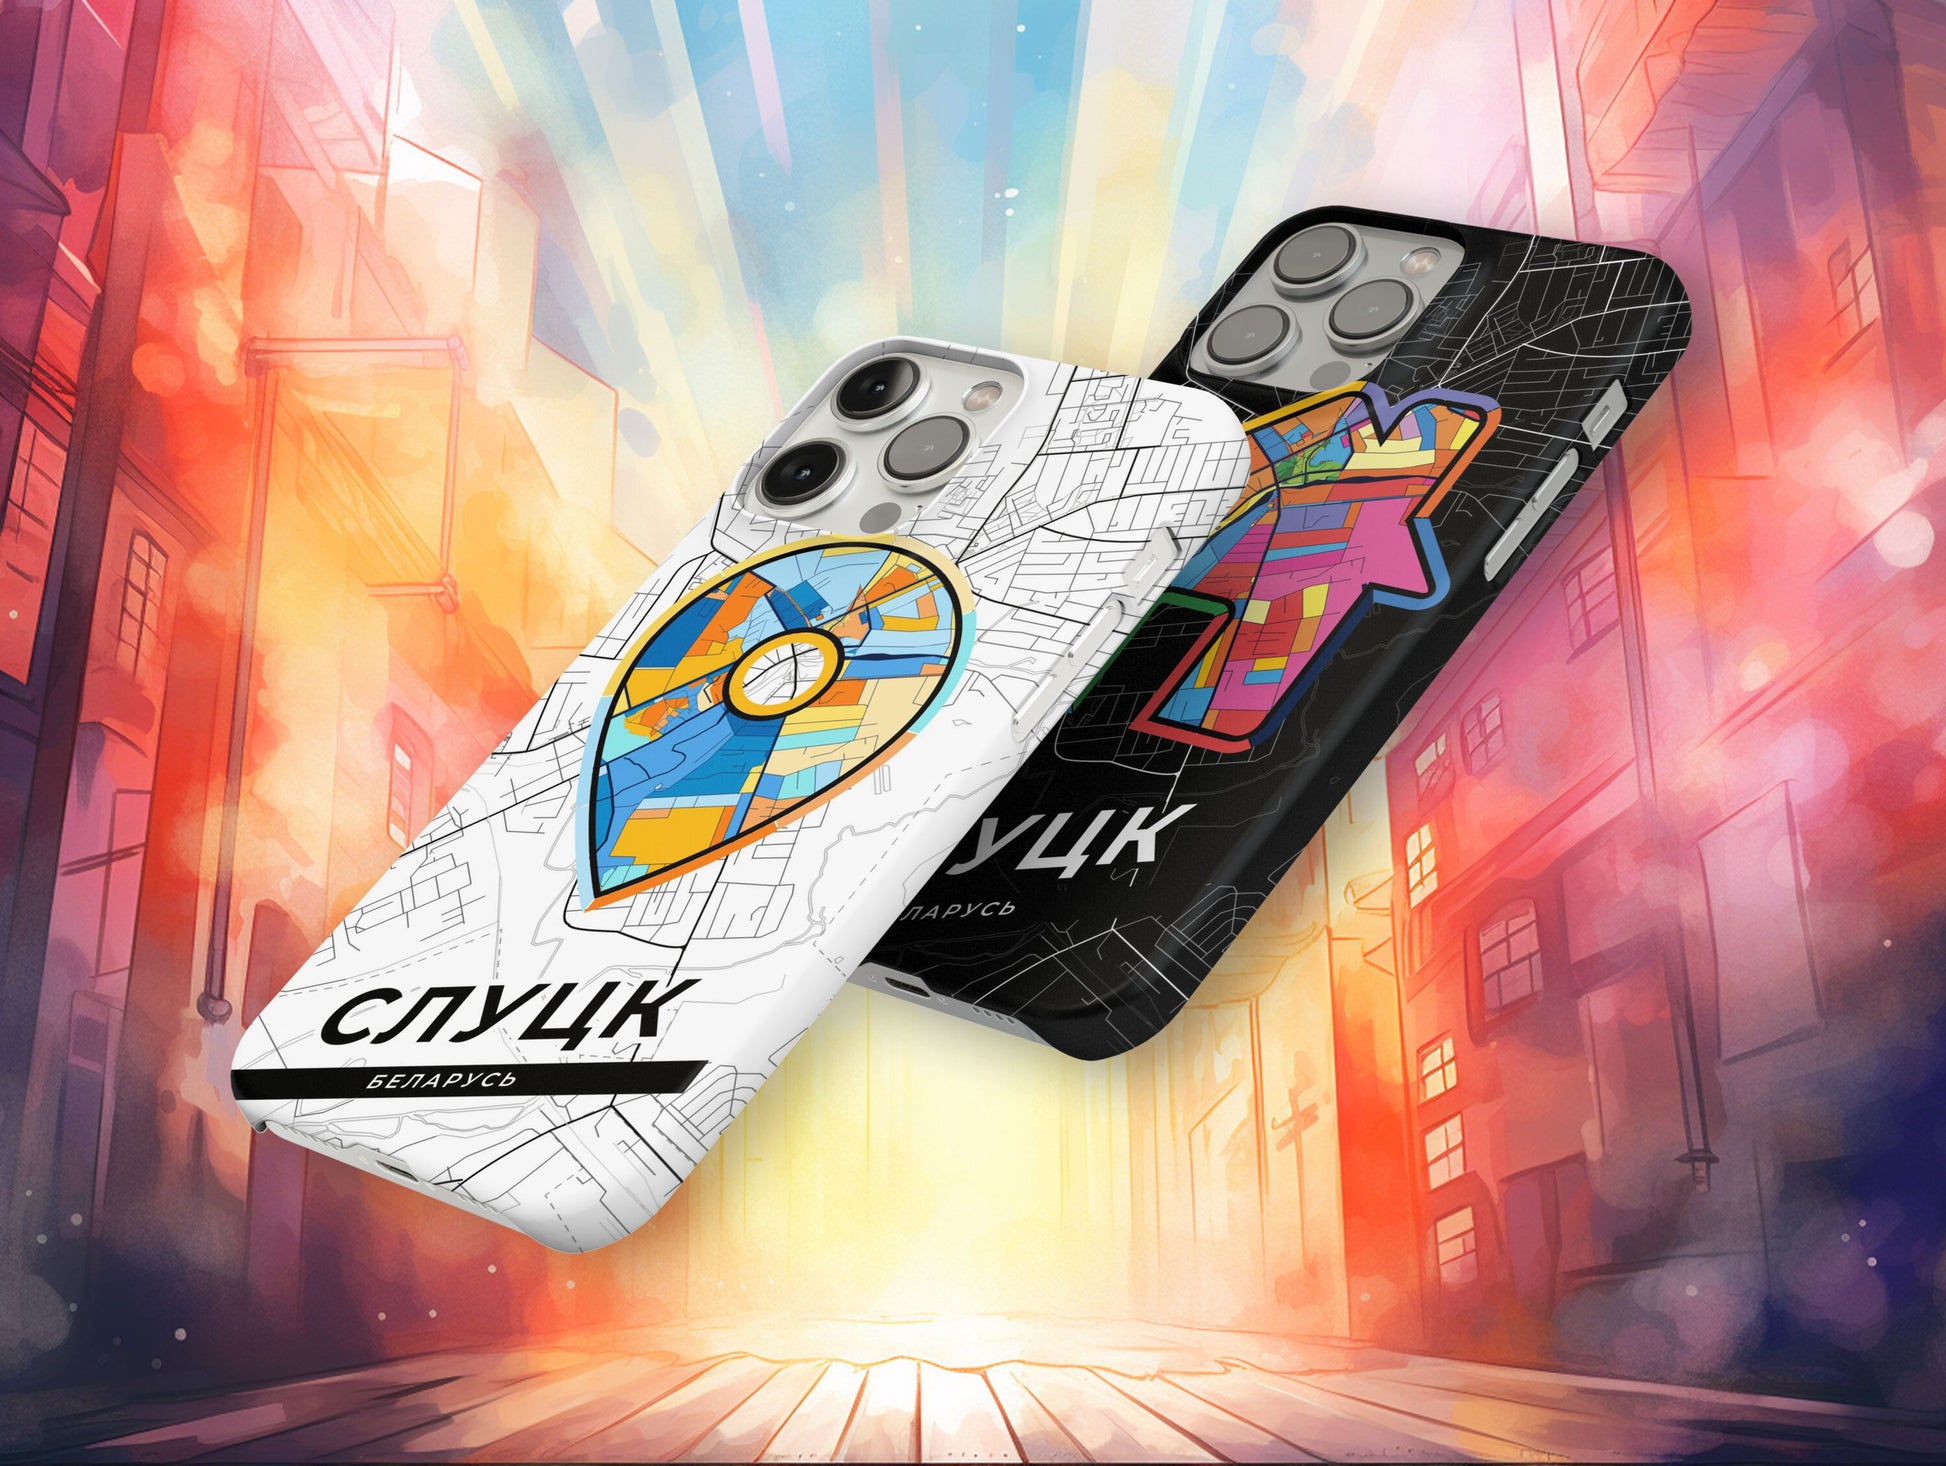 Слуцк Беларусь slim phone case with colorful icon. Birthday, wedding or housewarming gift. Couple match cases.